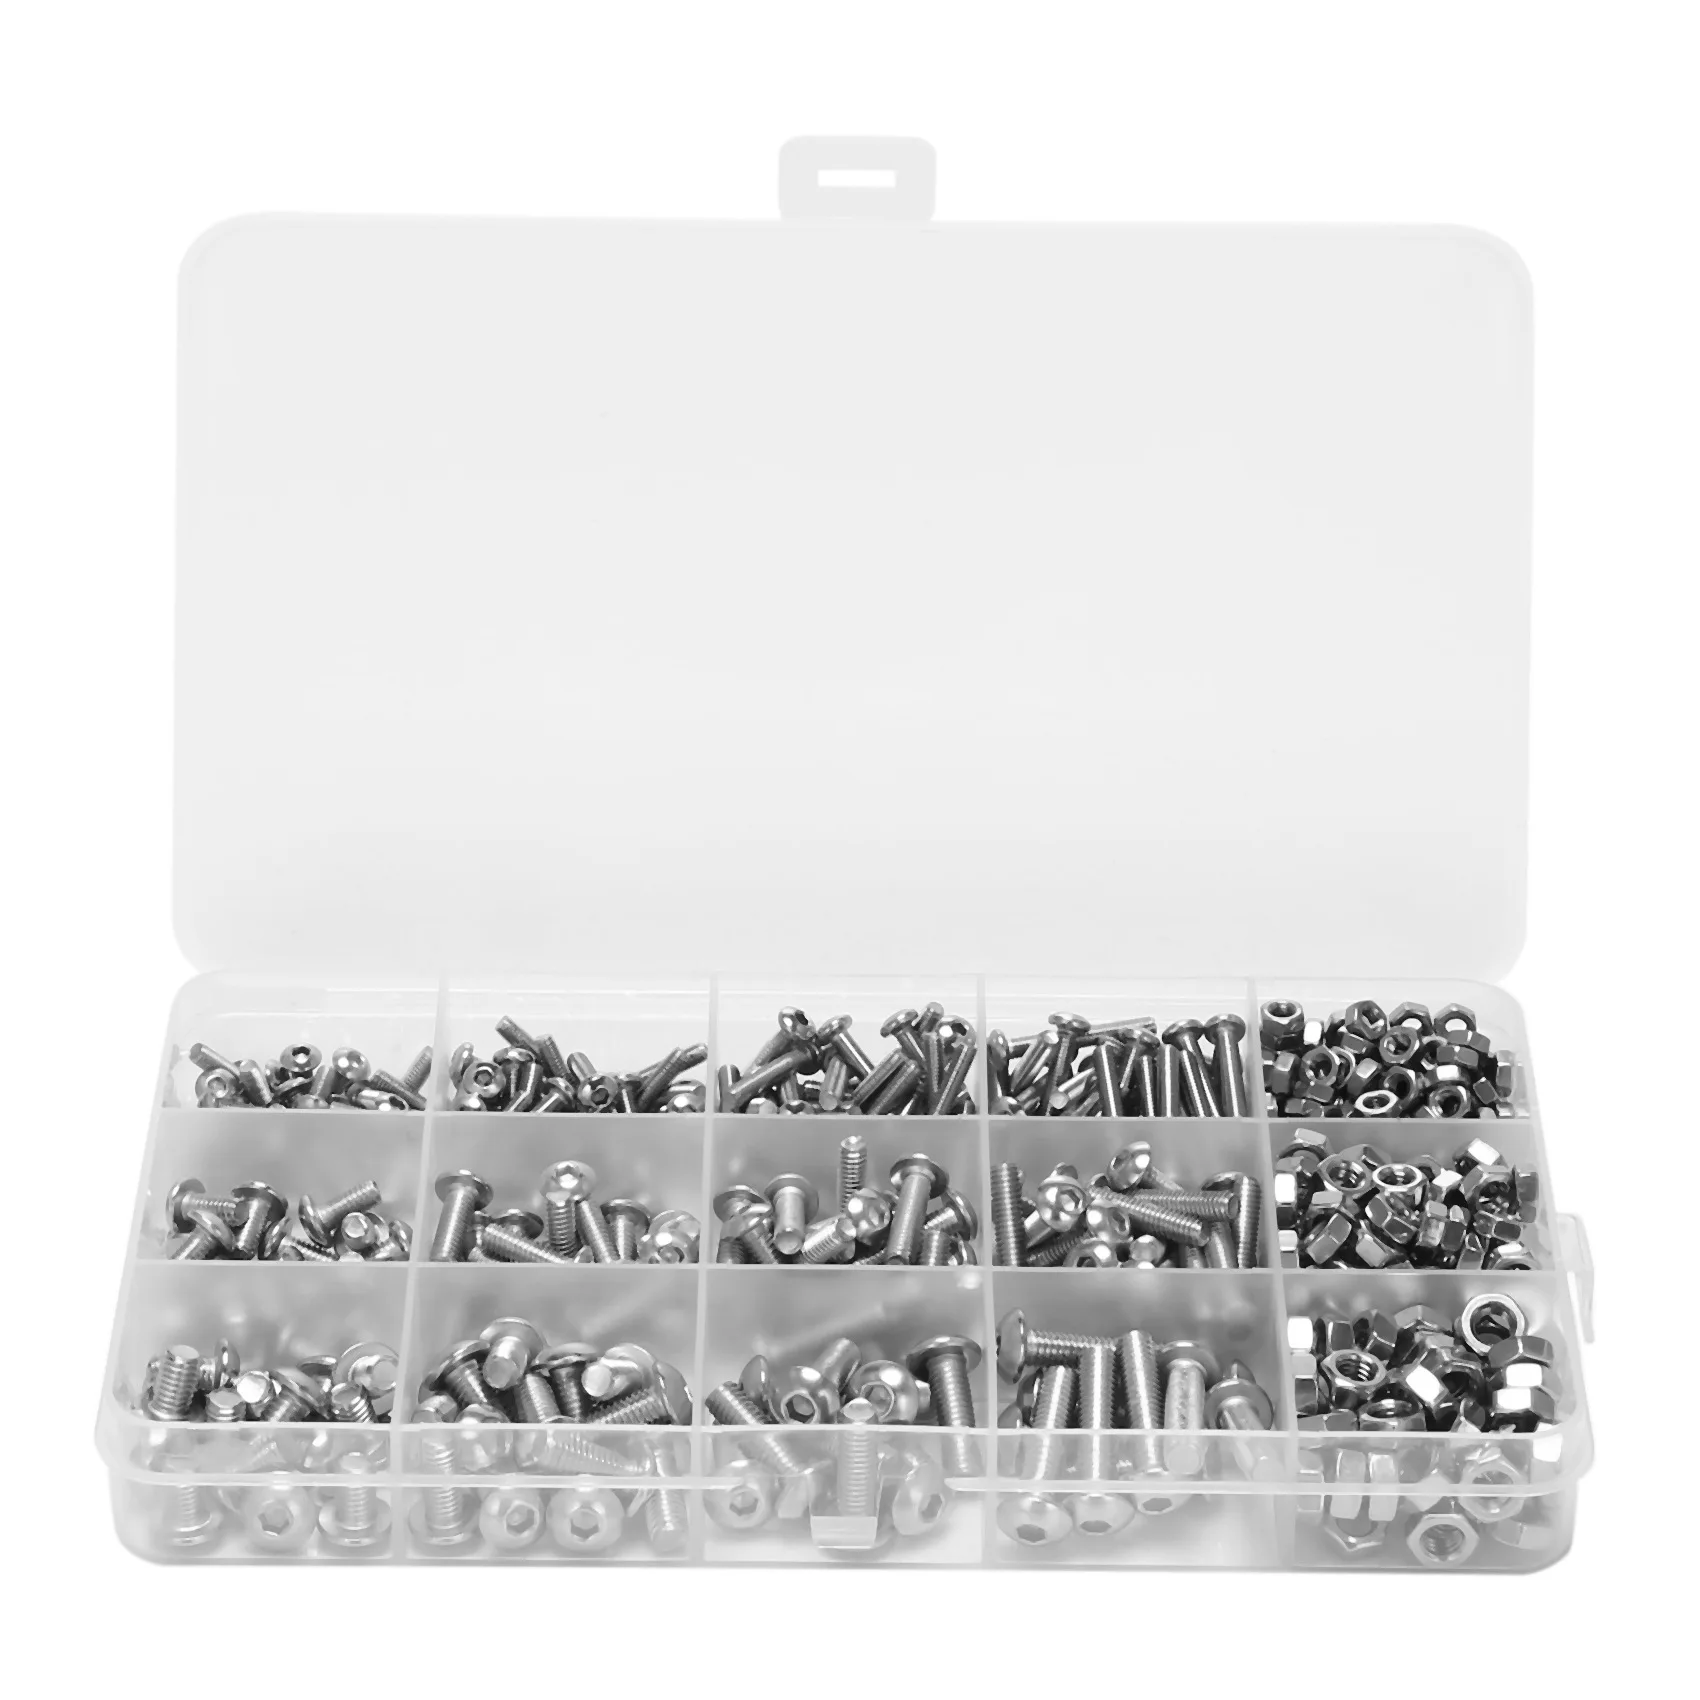 

Screw and Nut Kit,Machine Screw and Nut Kit, 500 Pcs M3 M4 M5 Stainless Steel Button Head Hex Socket Head Cap Bolts Screws with